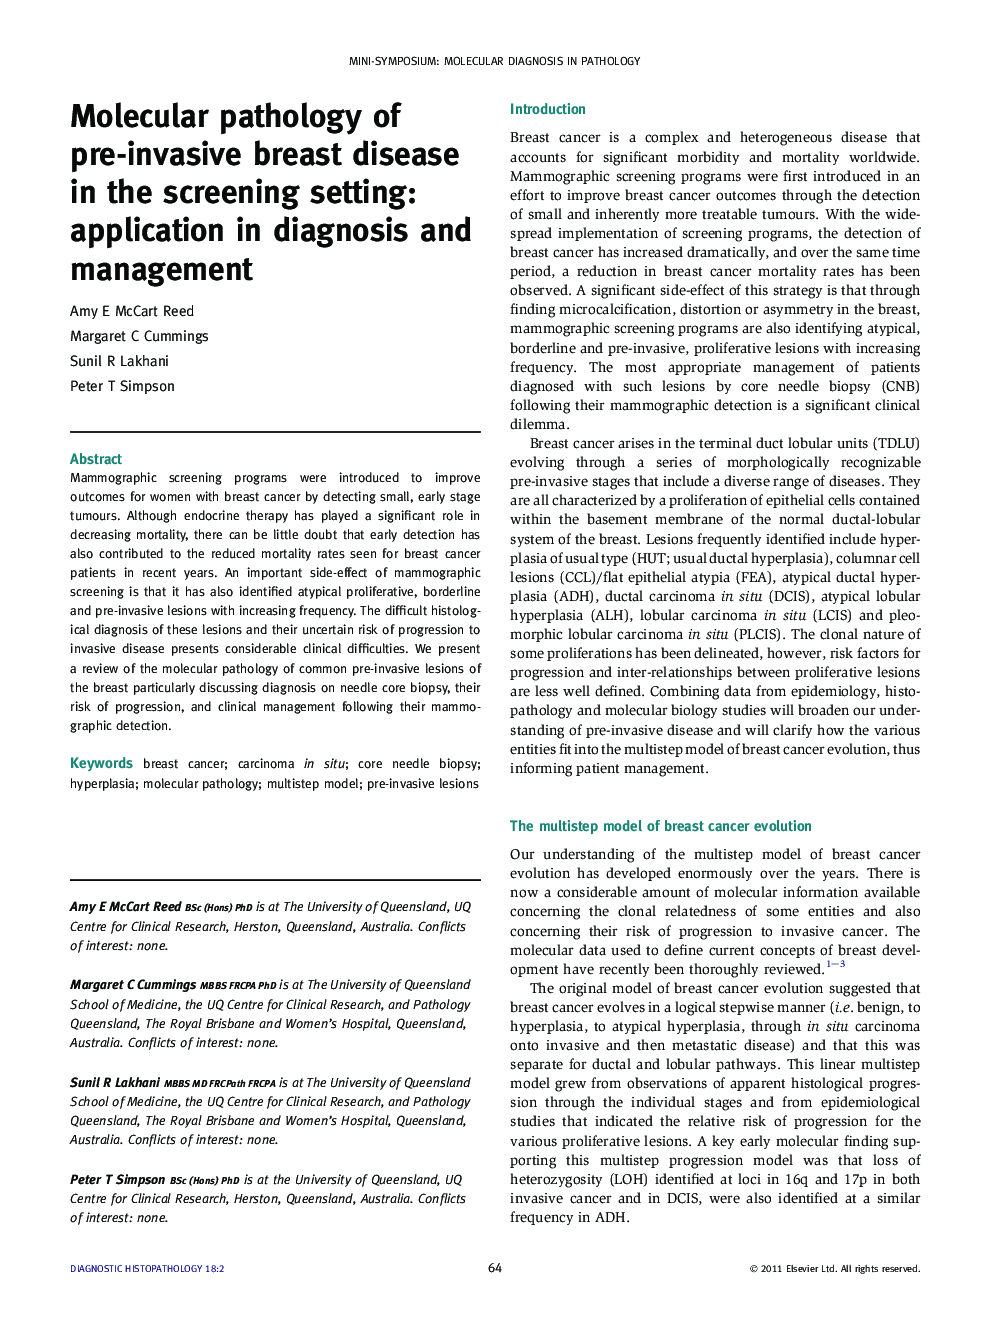 Molecular pathology of pre-invasive breast disease in the screening setting: application in diagnosis and management